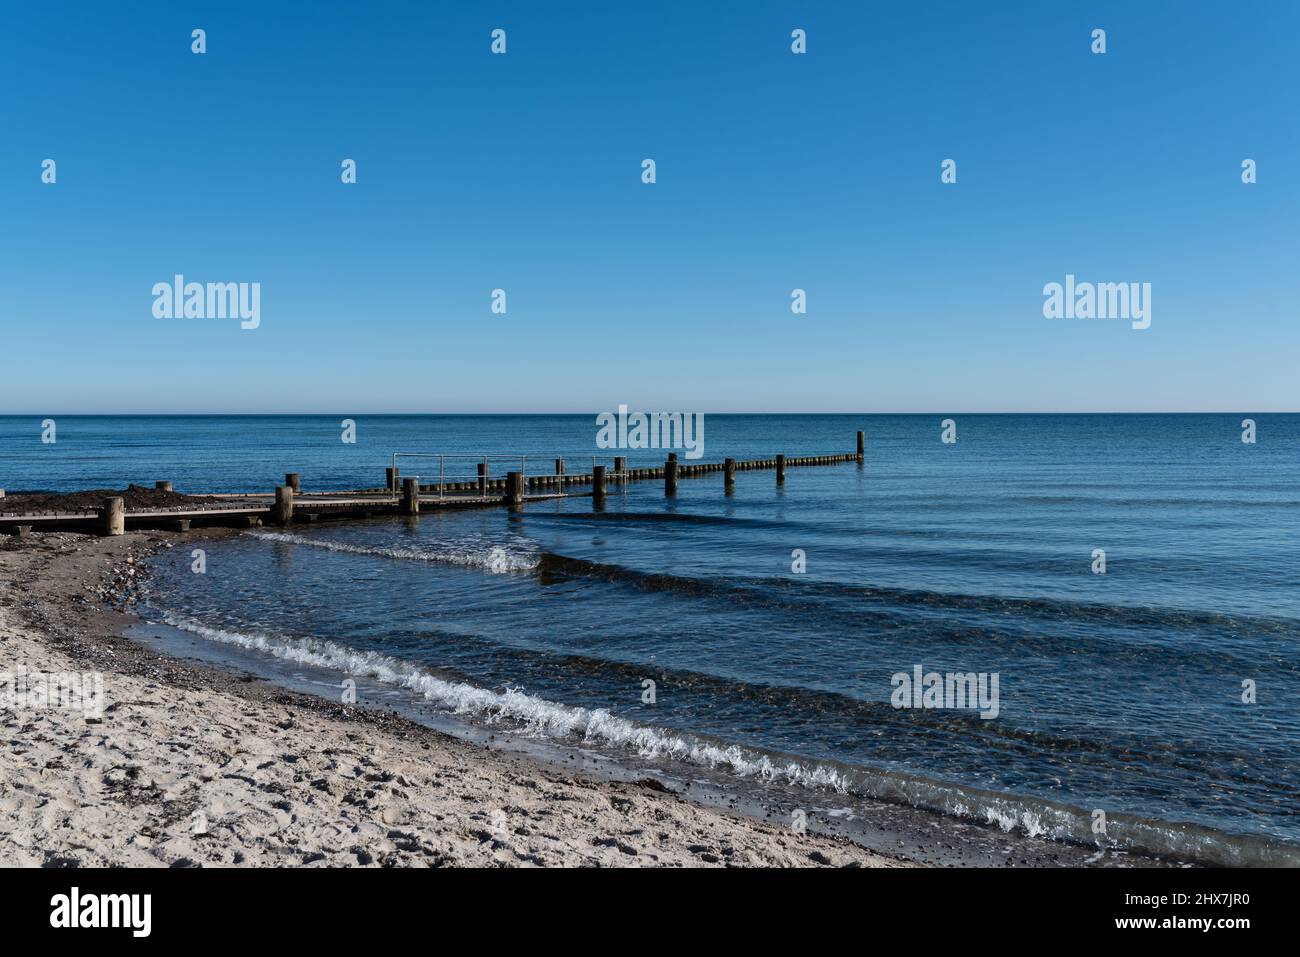 baltic sea sandy beach with bathing jetty and wooden breakwater against clear blue sky Stock Photo